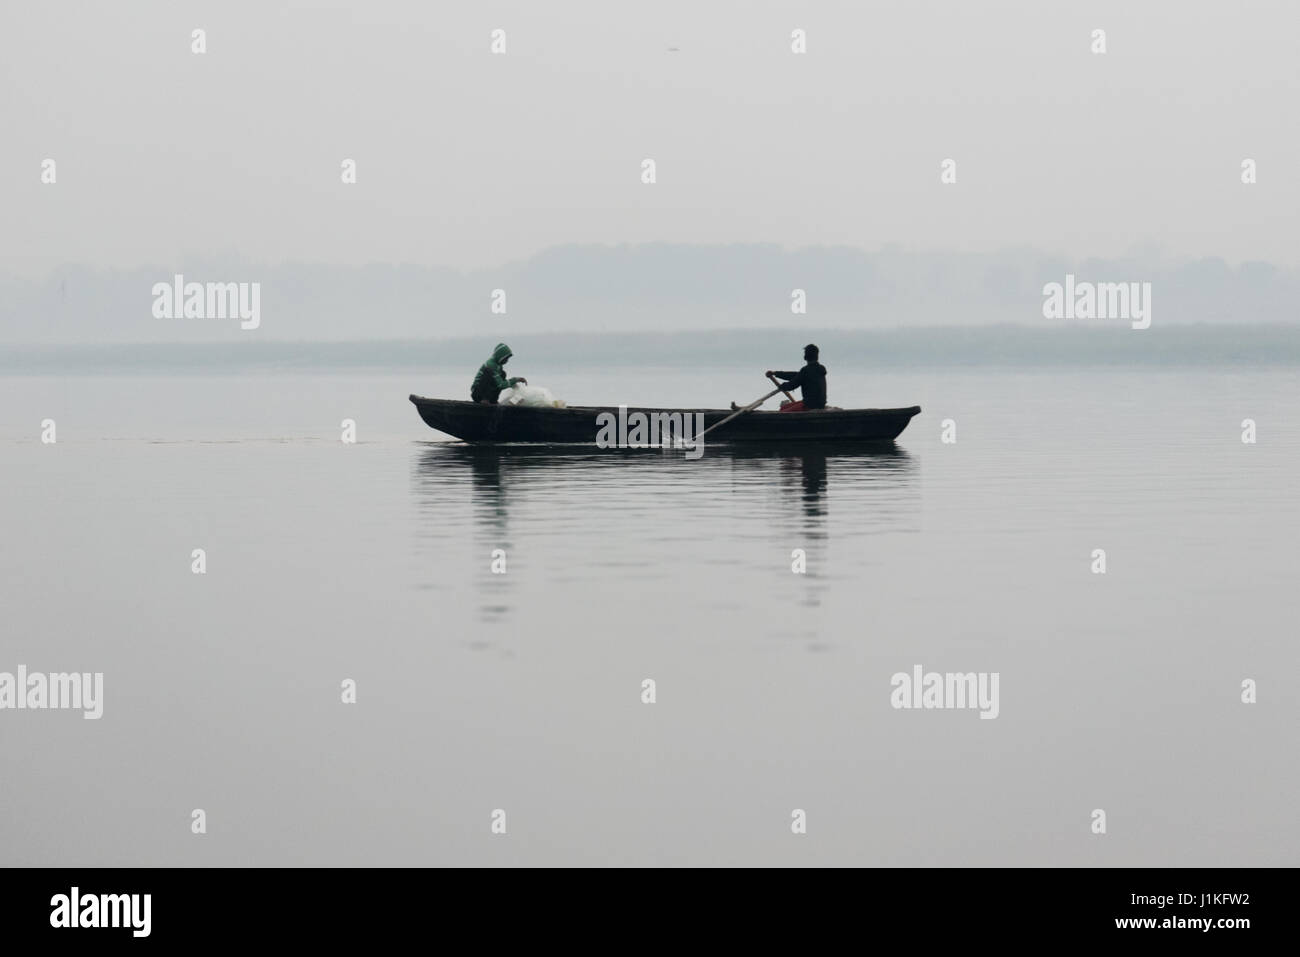 Two men rowing a boat on the river Ganges, Varanasi, India Stock Photo